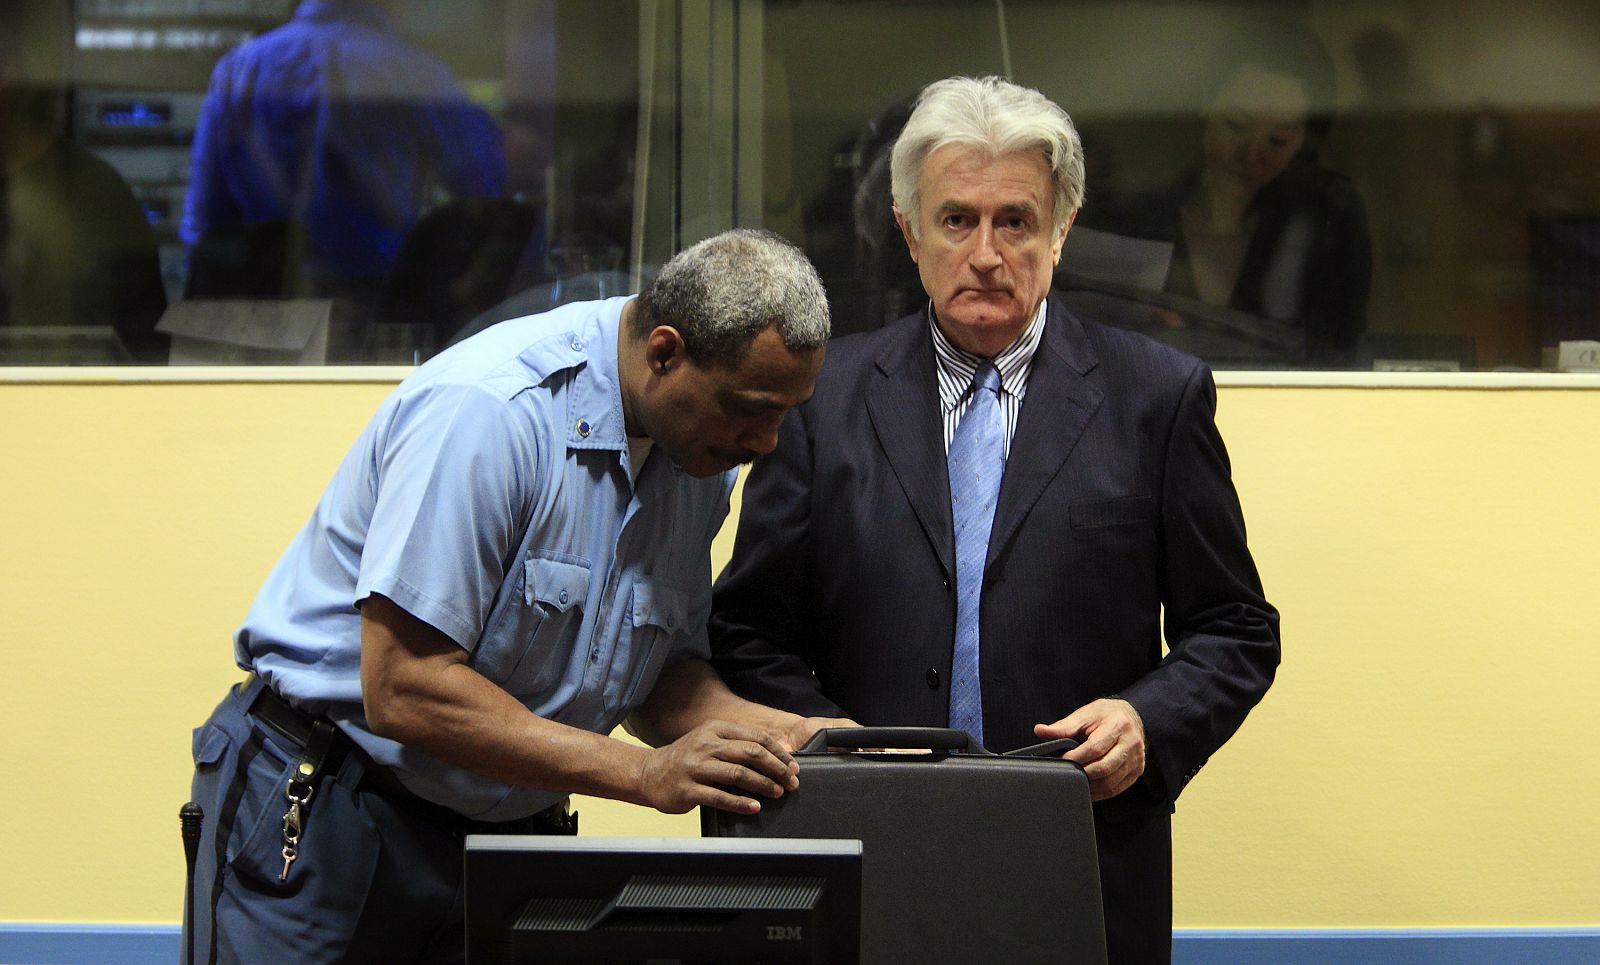 Former Bosnian Serb leader Karadzic appears in court at the ICTY in the Hague